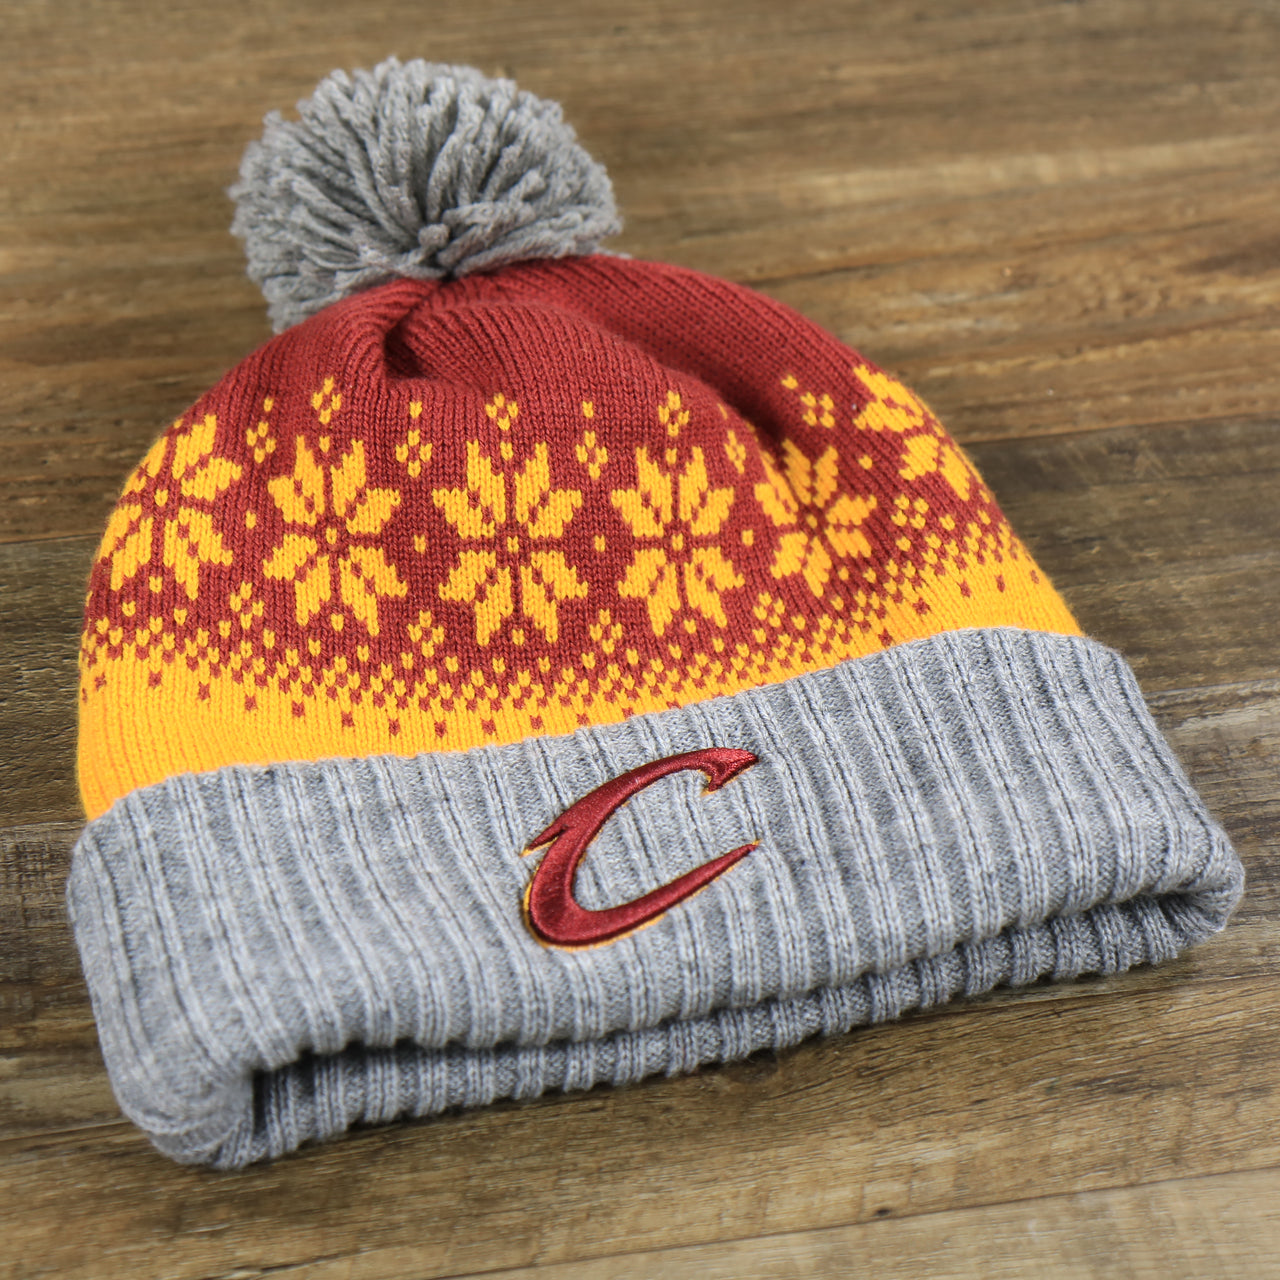 Cleveland Cavaliers Arctic Snowflake Ugly Sweater Pattern Cuffed Beanie With Pom Pom | Yellow, Maroon, and Gray Winter Beanie